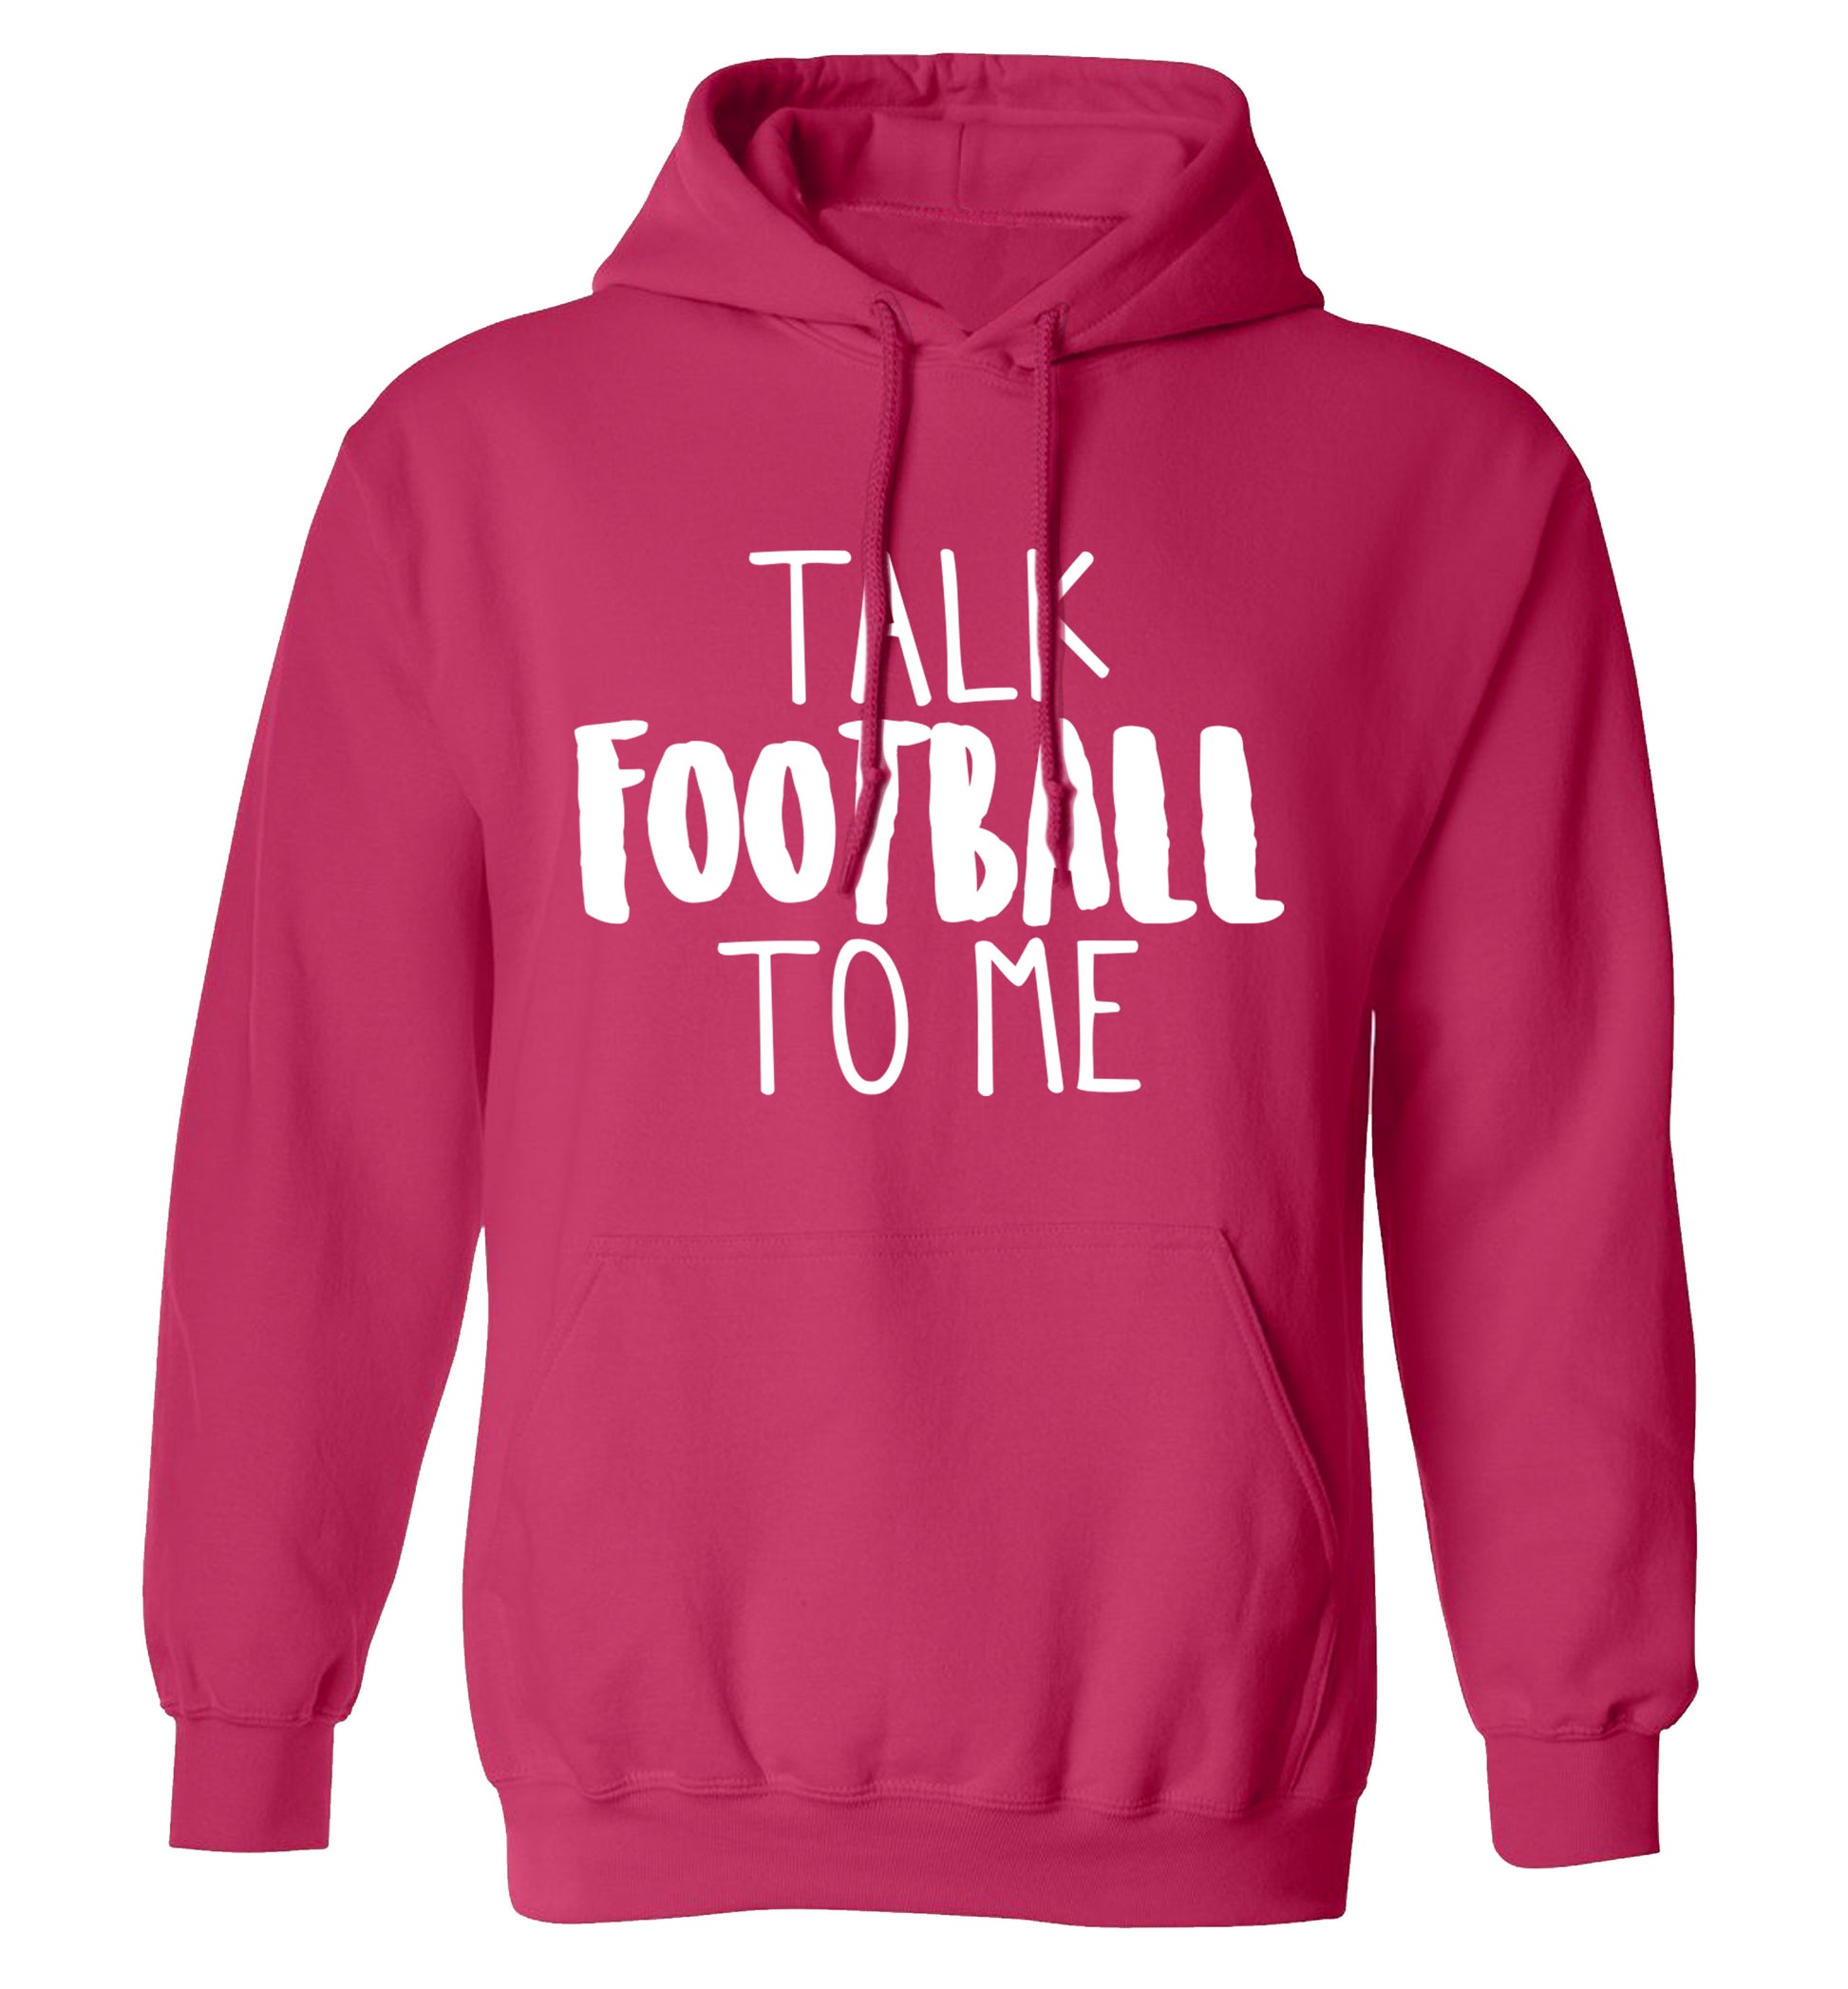 Talk football to me adults unisexpink hoodie 2XL